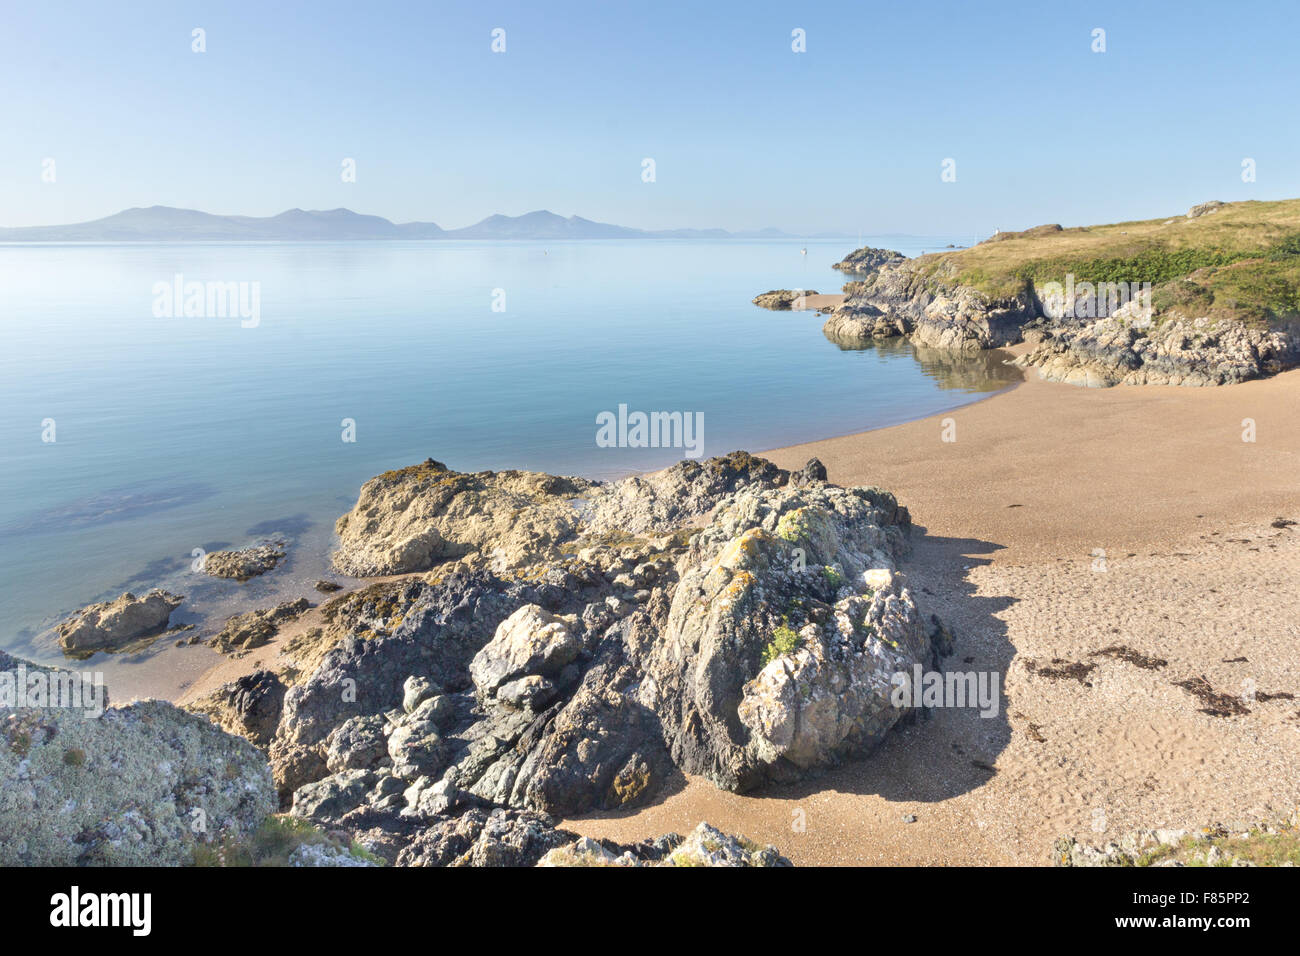 Volcanic rock and beach on Llanddwyn Island, Anglesey, Wales with the Llyn peninsula in the background Stock Photo